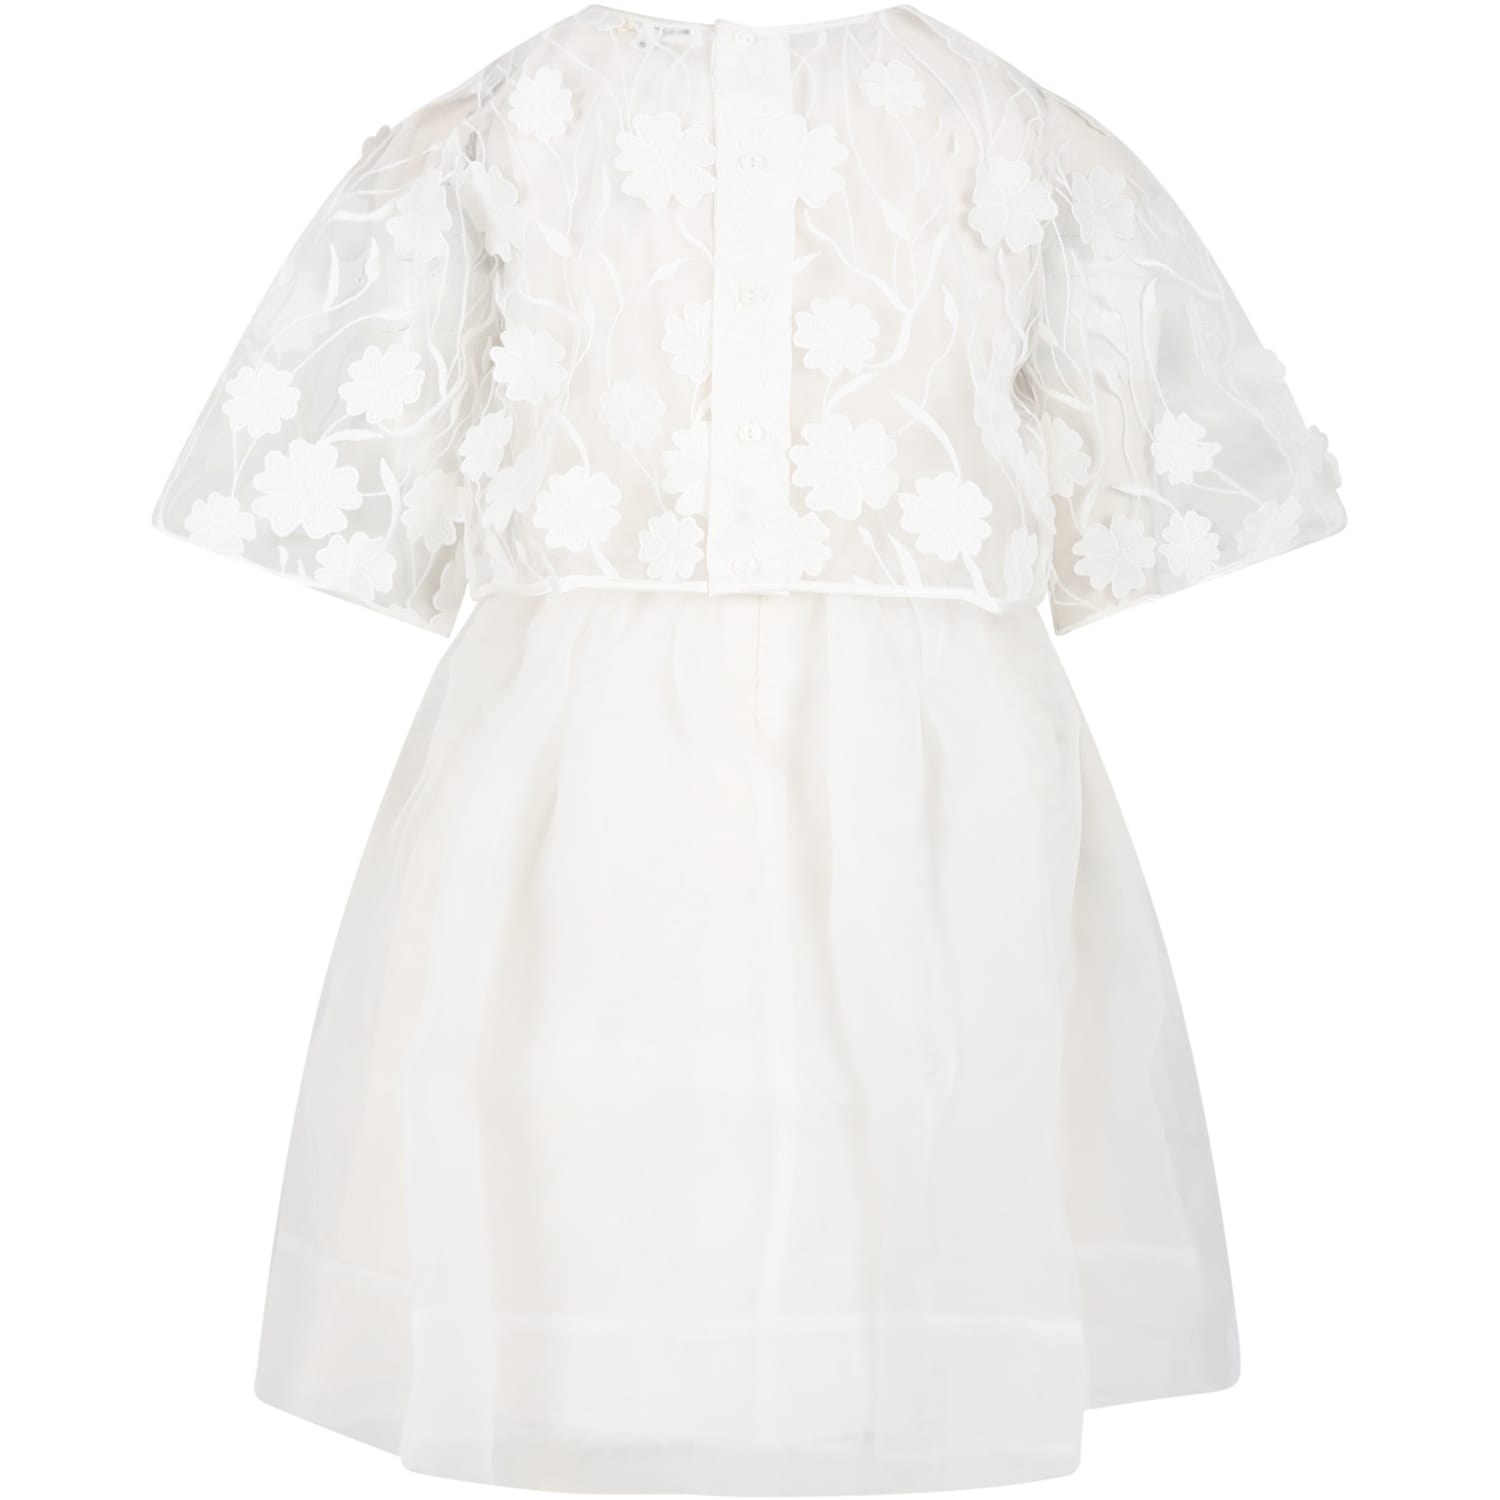 Shop Charabia White Dress For Girl With Lace In Ivory